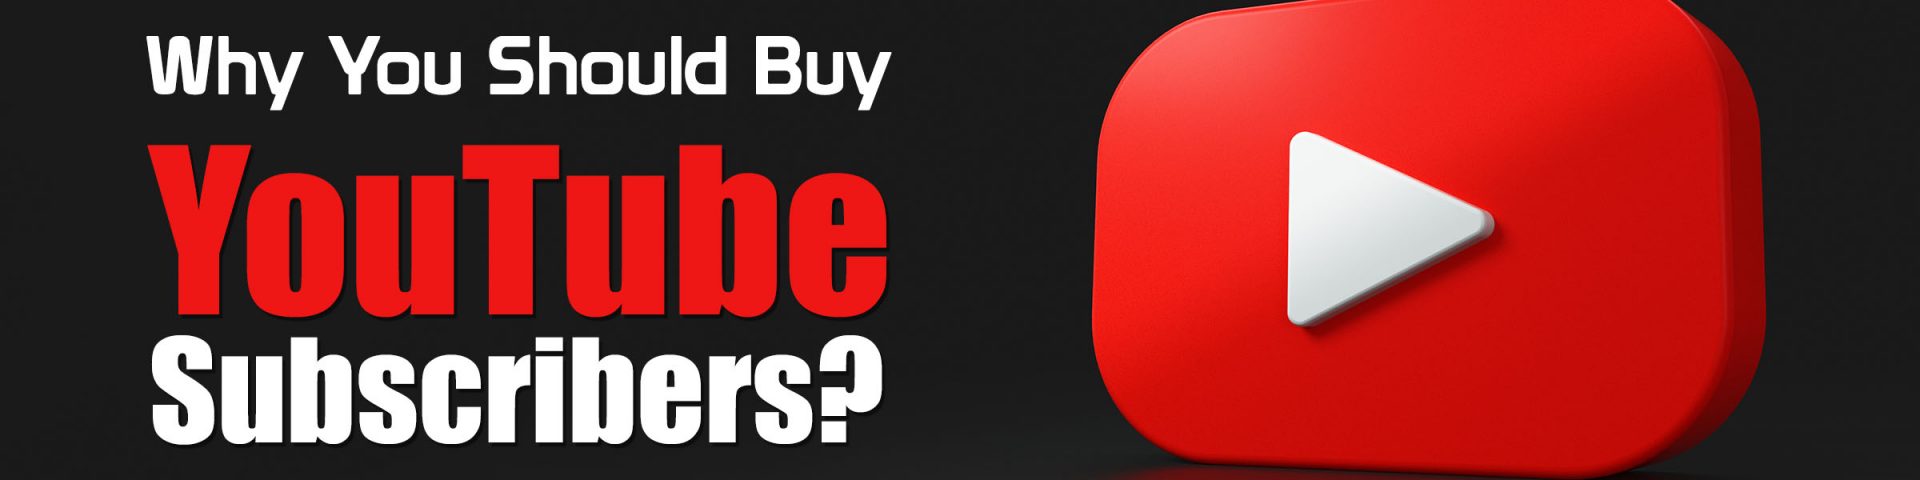 why you should buy youtube subscribers